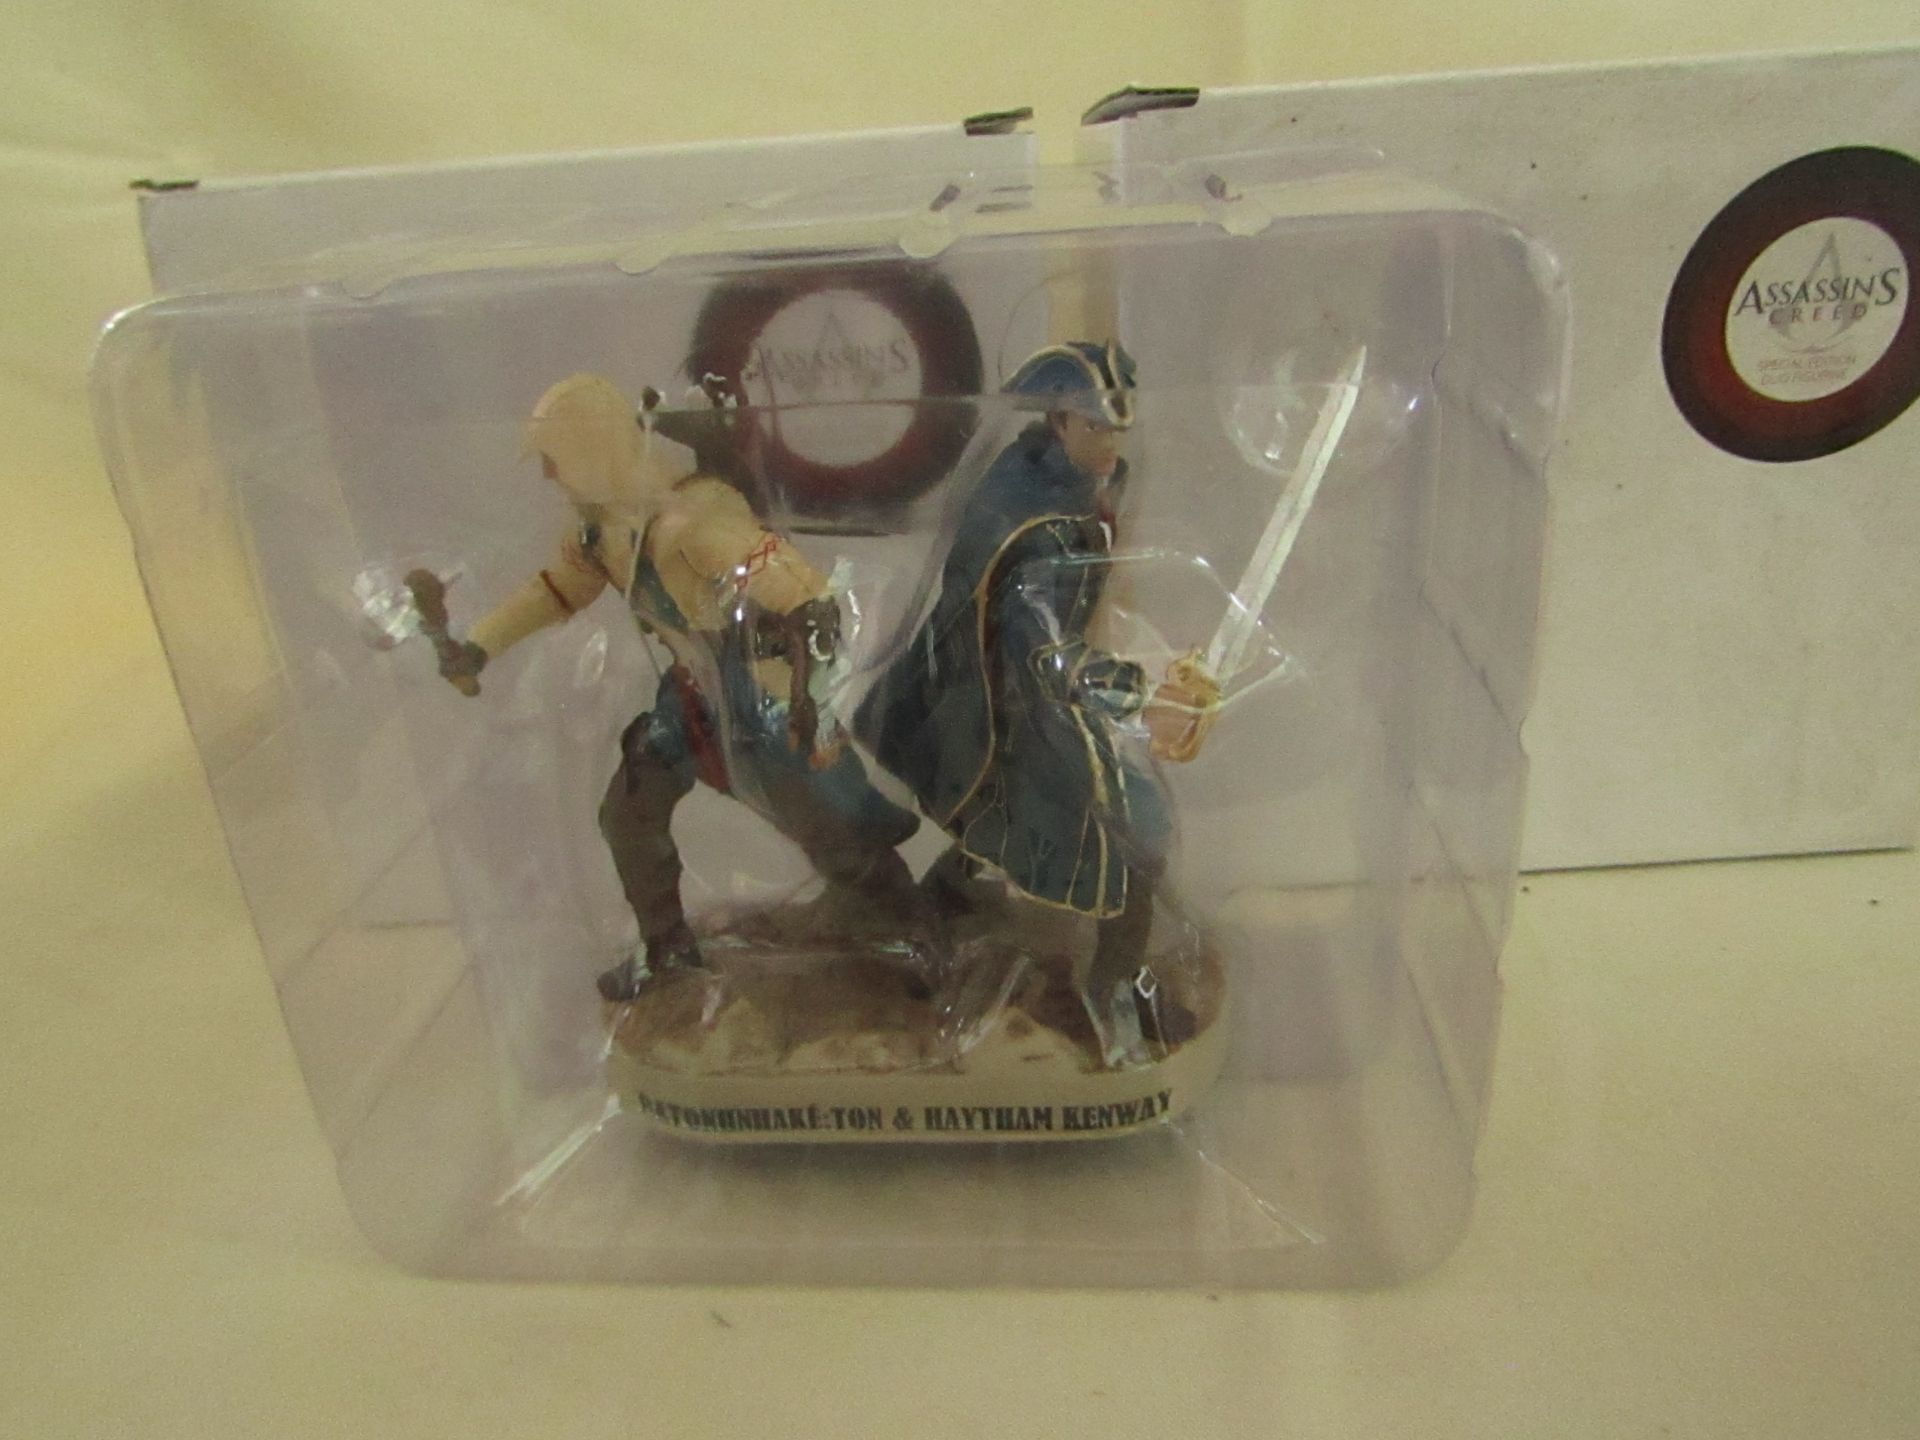 2x Assassin's Creed - Special Edition Duo Figurine - New & Boxed.